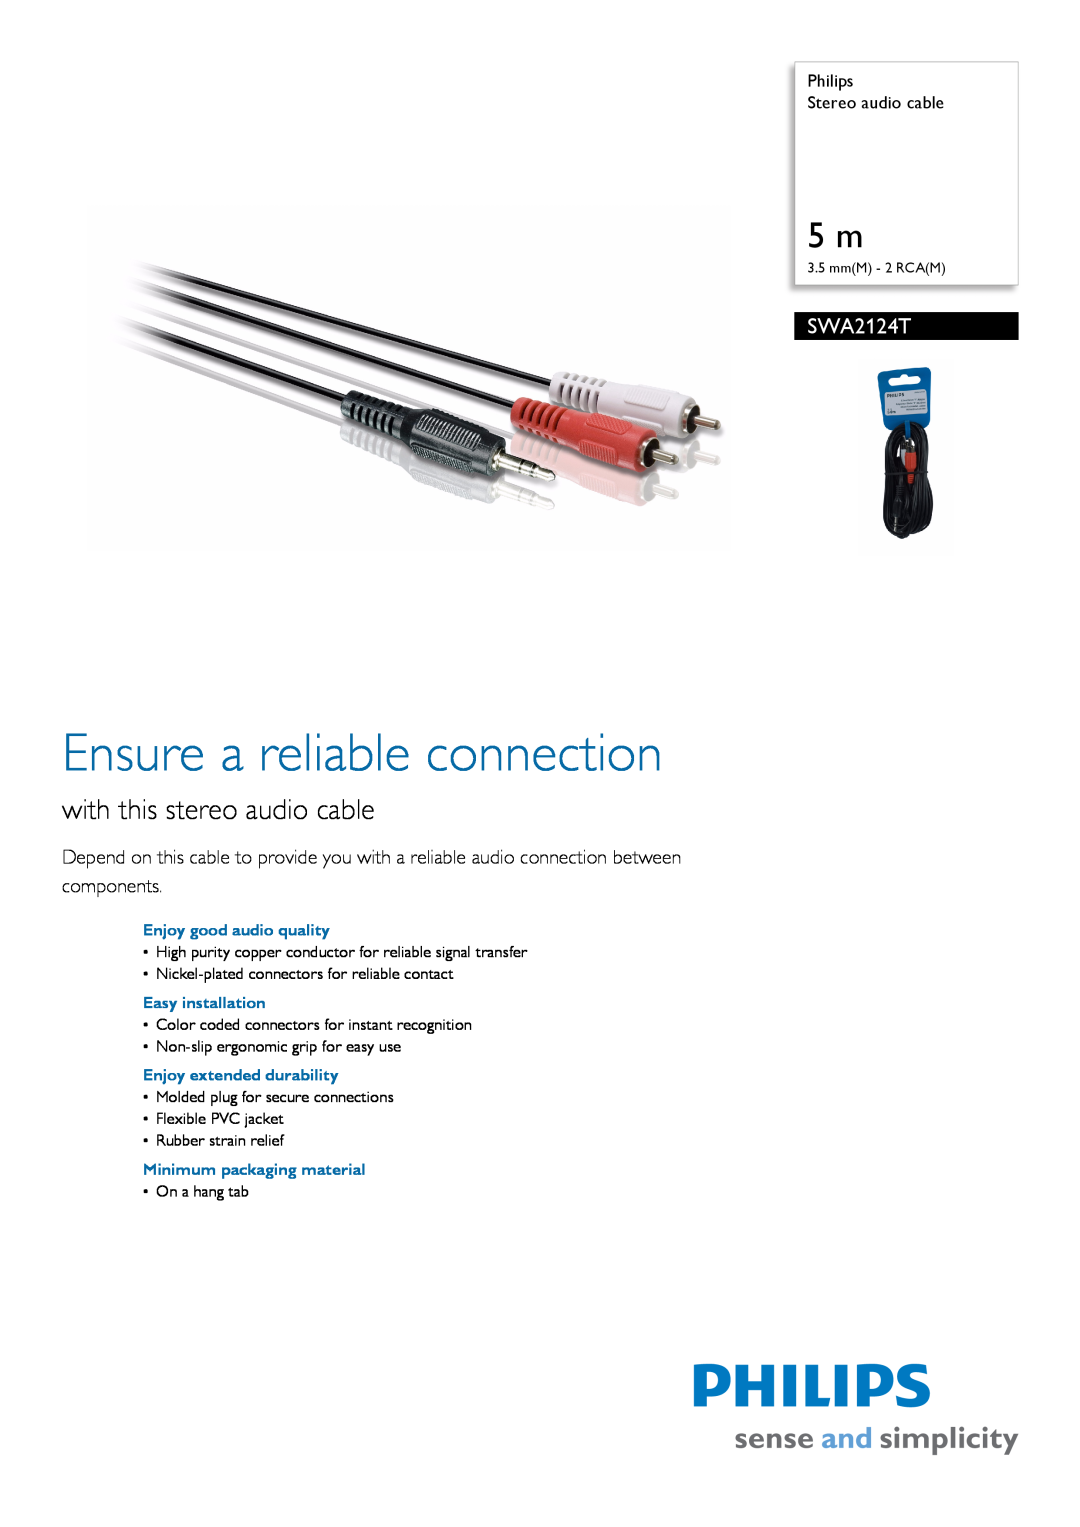 Philips SWA2124T manual Philips Stereo audio cable, Ensure a reliable connection, with this stereo audio cable 